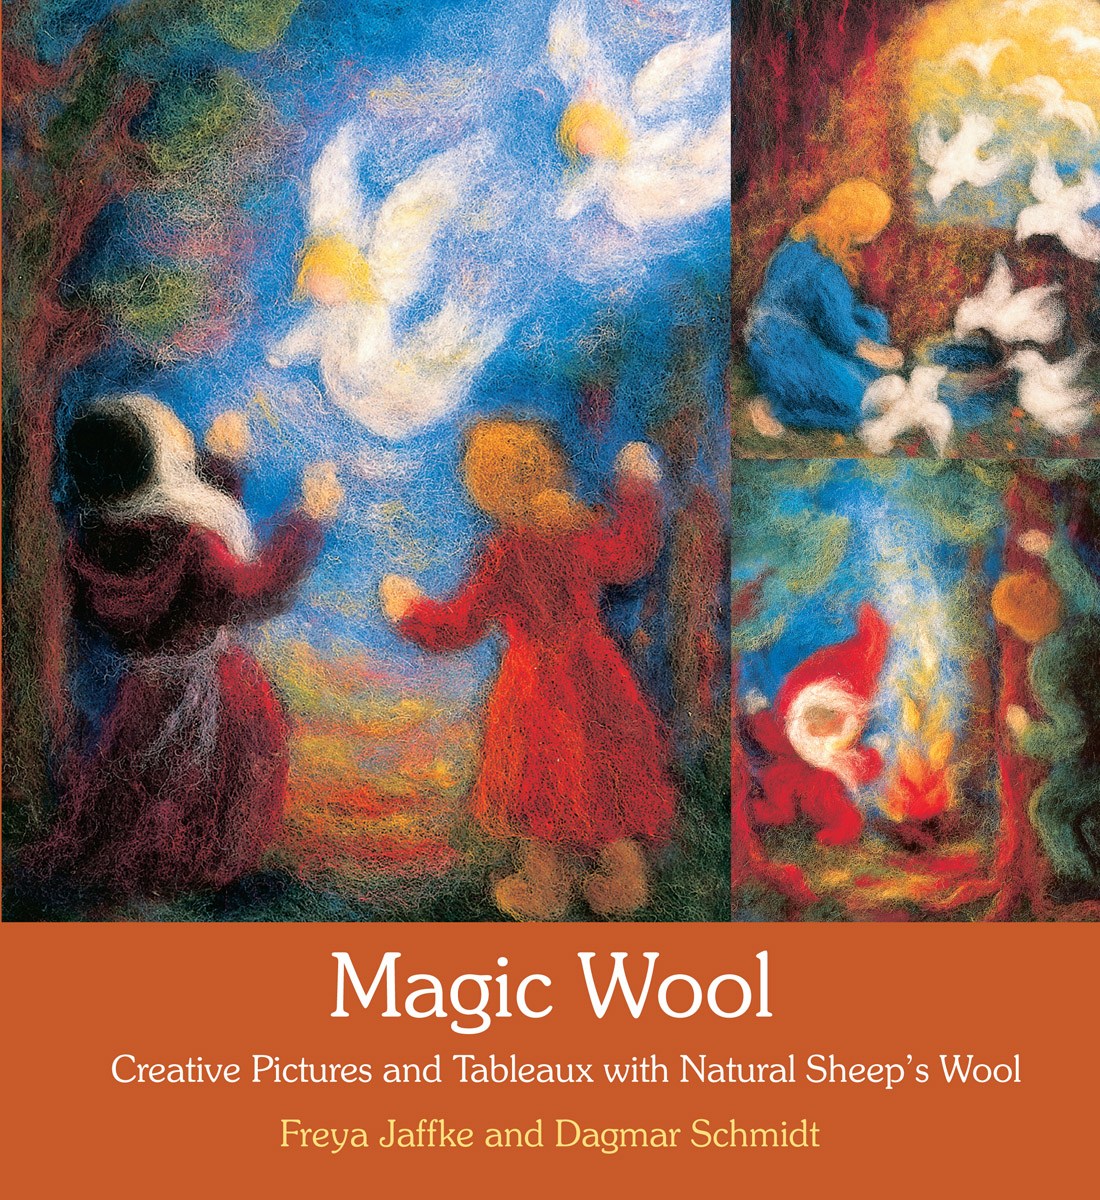 Magic Wool: Creative Pictures and Tableaux with Natural Sheep's Wool Dagmar Schmidt and Freya Jaffke